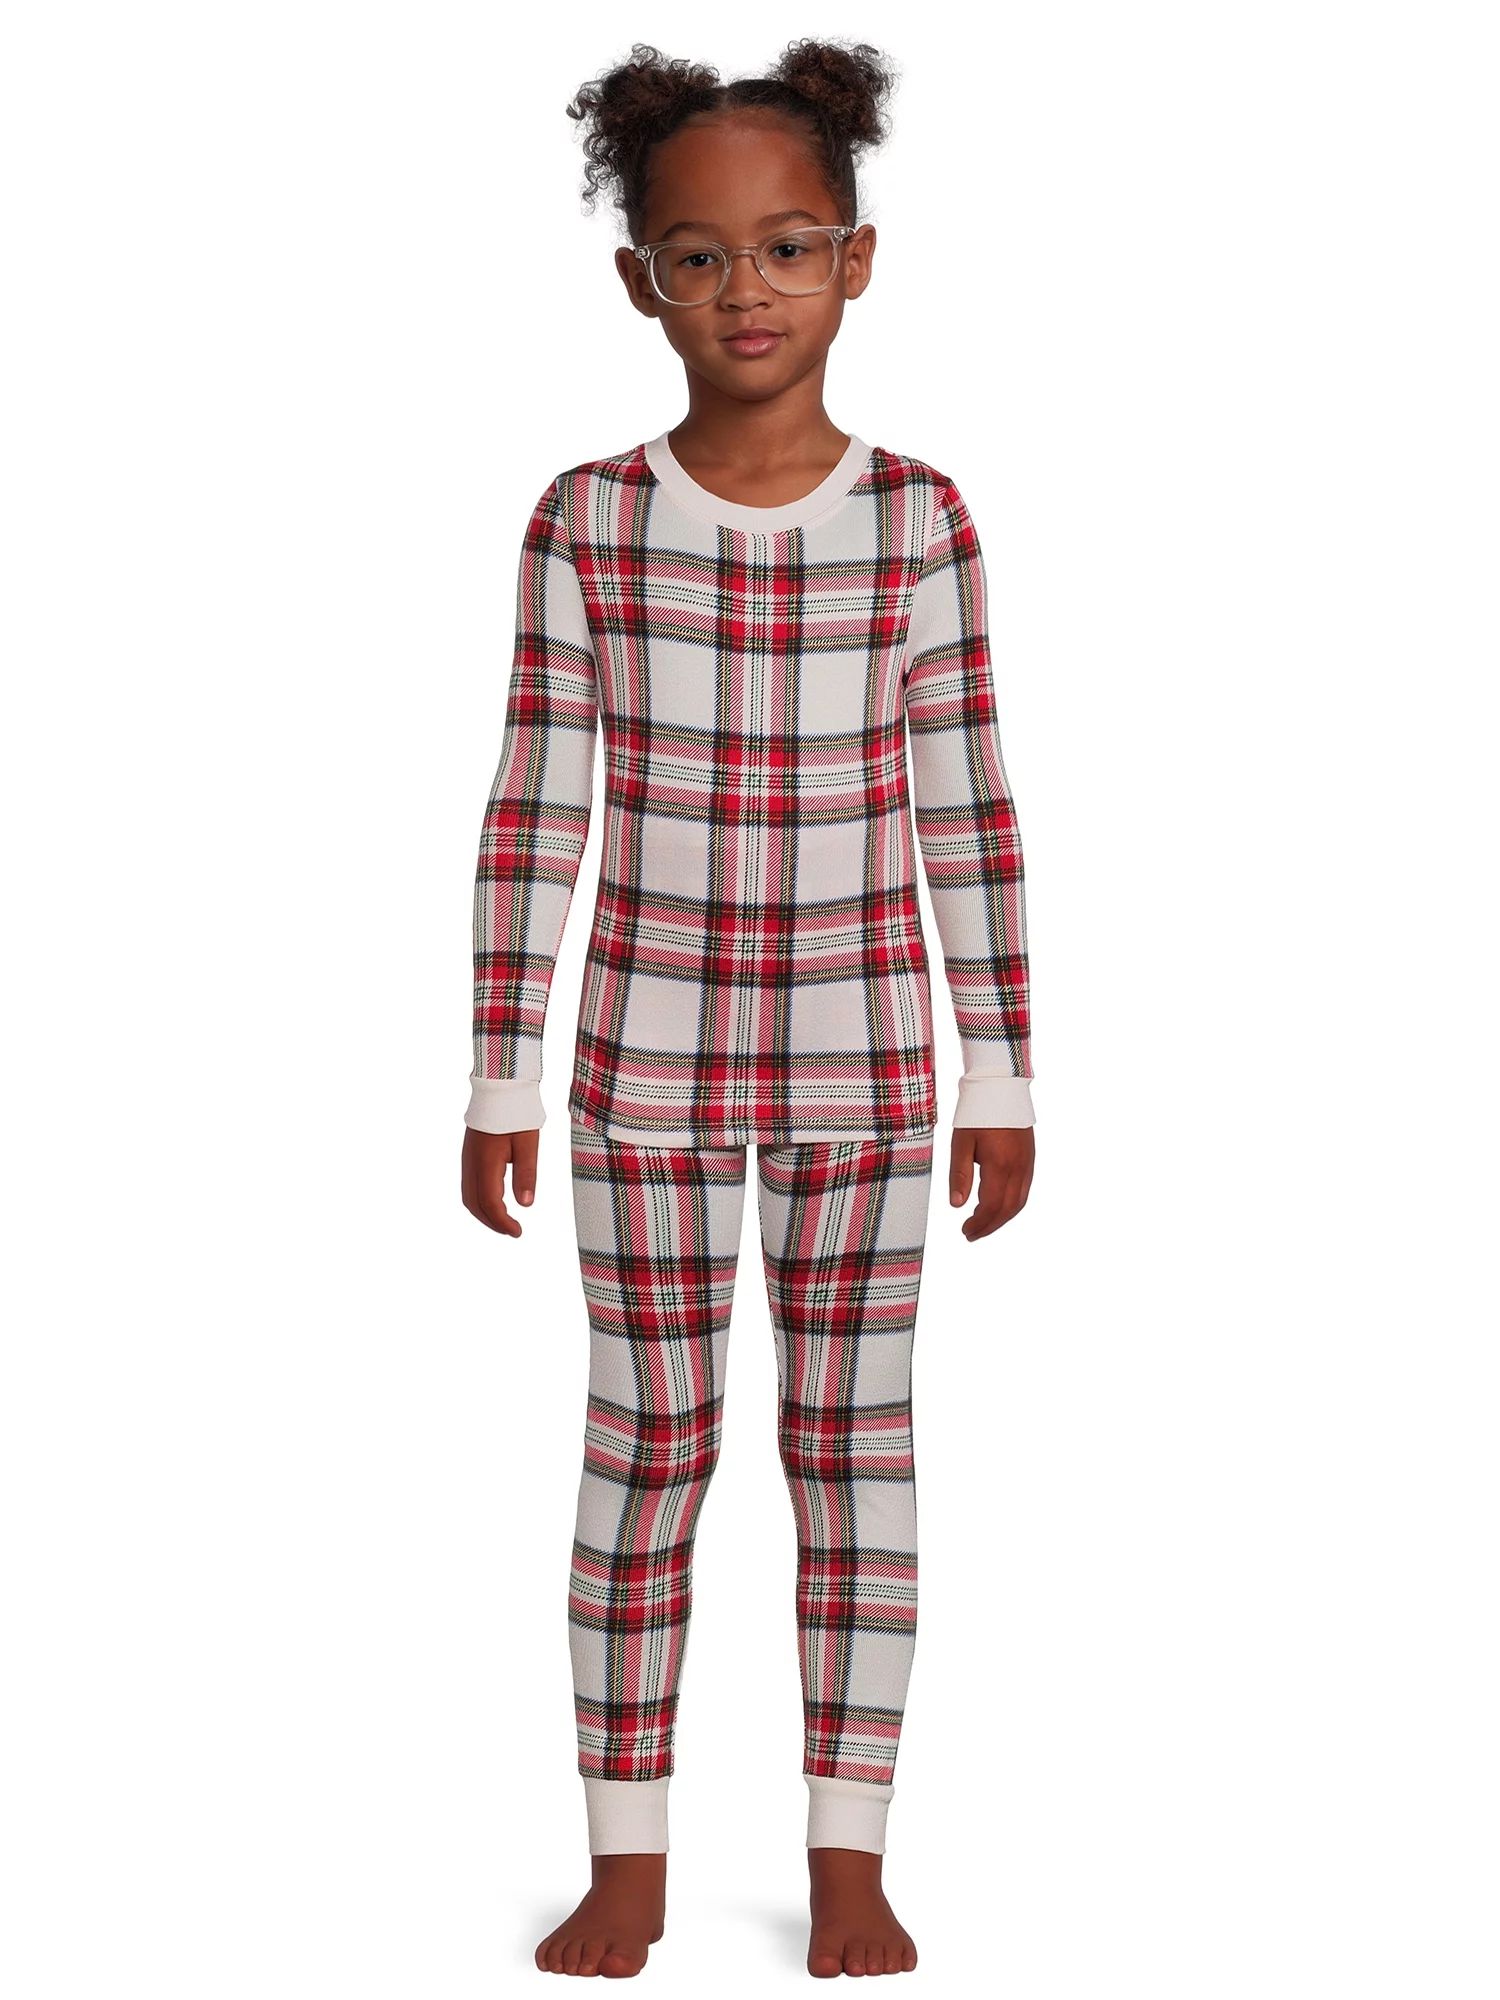 Holiday Time Girls Tight Fit Long Sleeve Sleepwear Pajama Top and Pants, 2-Piece Set, Sizes 4-10 | Walmart (US)